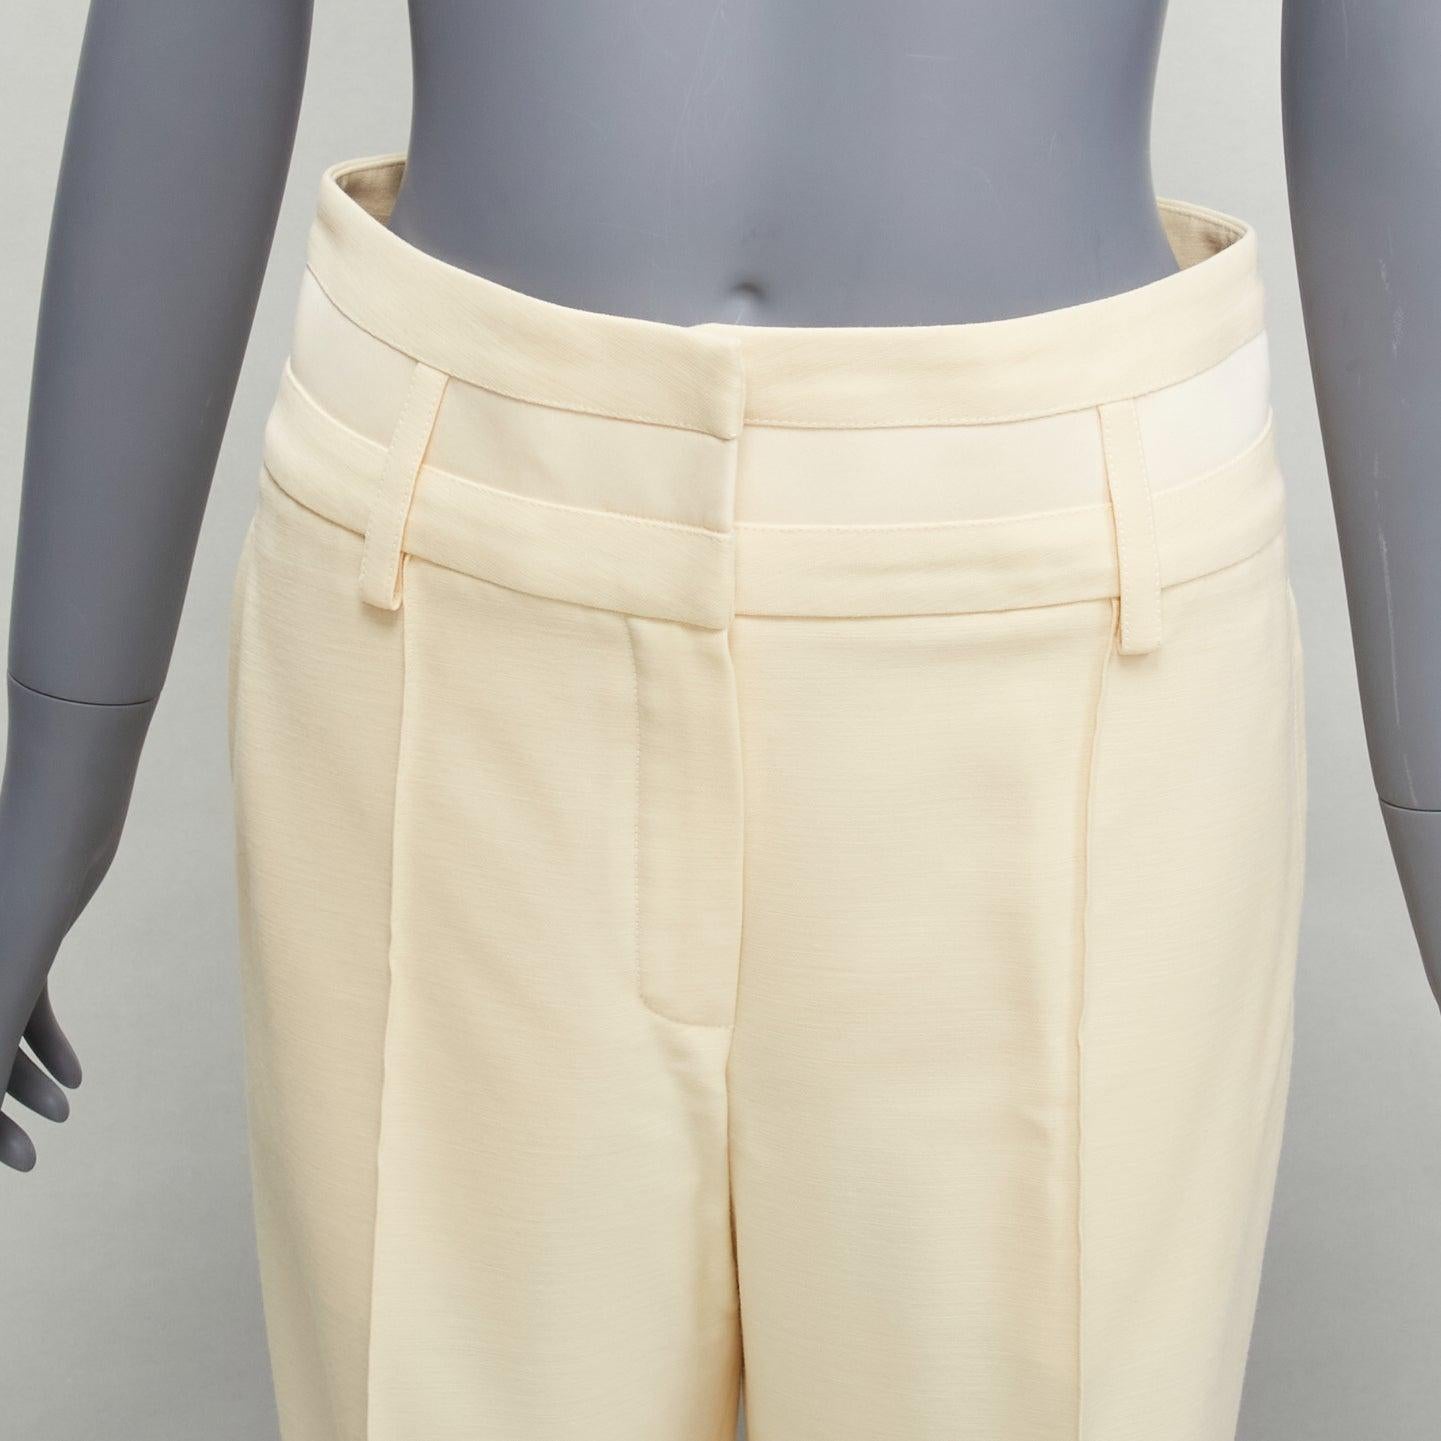 HERMES cream wool silk panelled waistband wide leg cropped pants FR34 XS
Reference: SNKO/A00298
Brand: Hermes
Material: Wool, Silk
Color: Beige
Pattern: Solid
Closure: Zip Fly
Lining: Cream Fabric
Extra Details: Panels at waistband.
Made in: